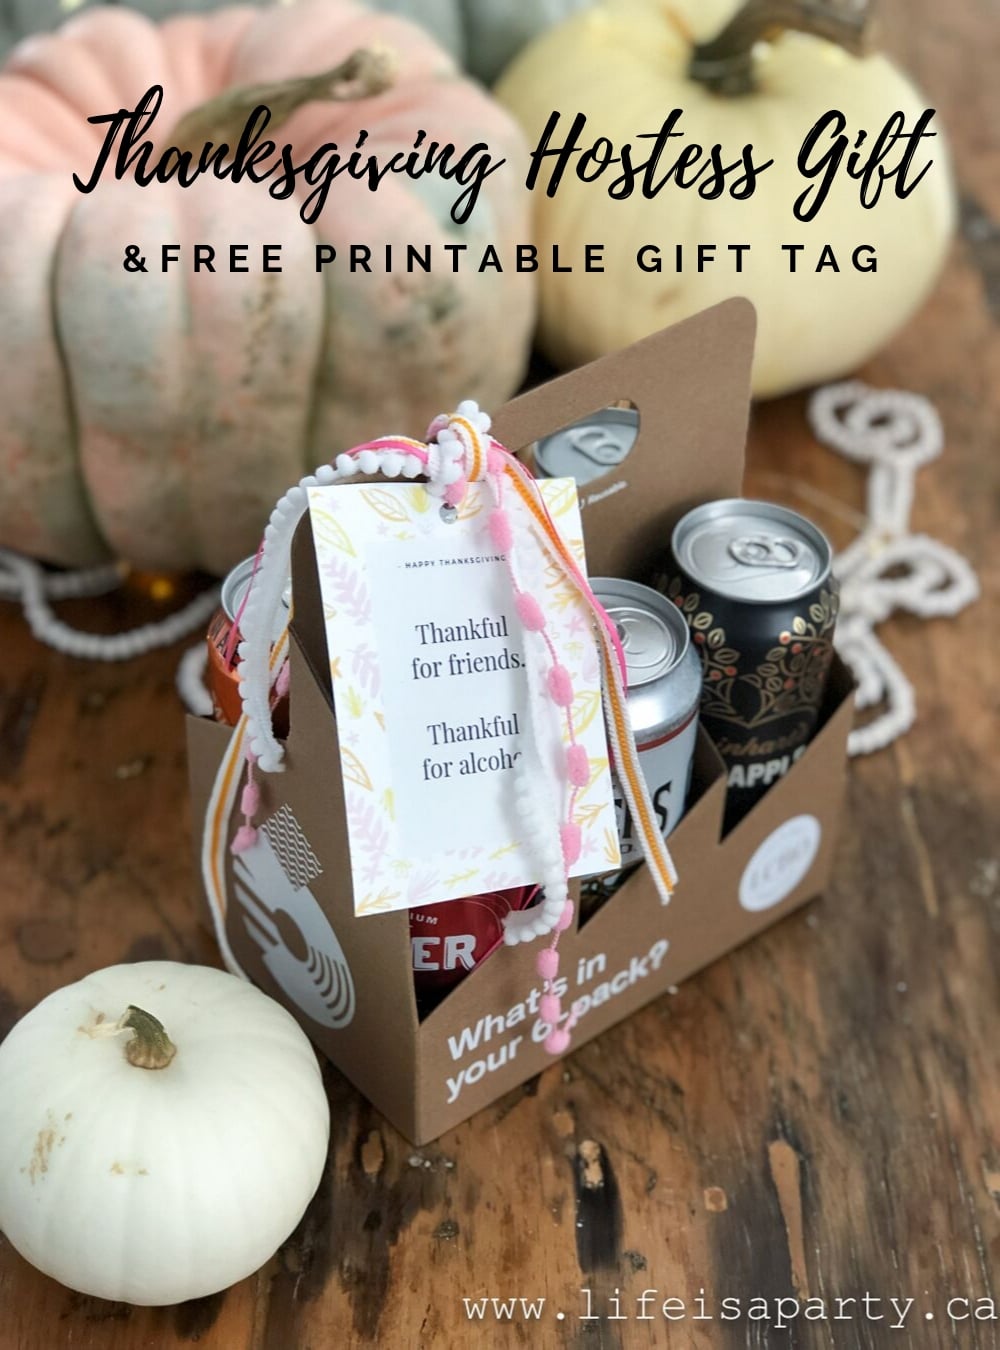 Thanksgiving Hostess Gift: Give your hosts drinks with a cheeky free printable gift tag for friends or family in 3 different colours.